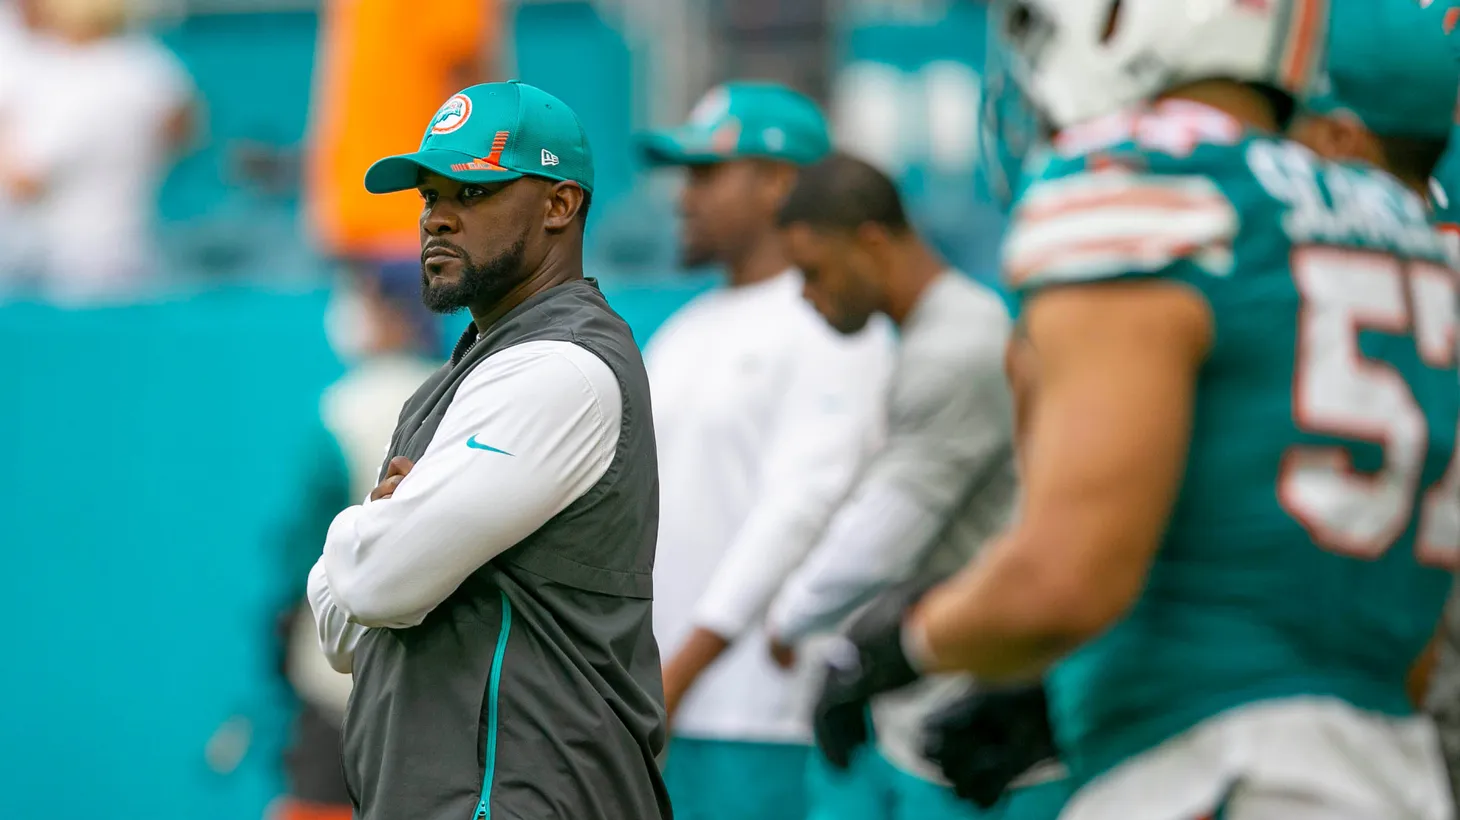 Brian Flores stands before the start of the Miami Dolphins’ game against the New England Patriots at Hard Rock Stadium in Miami Gardens, January 9, 2022.